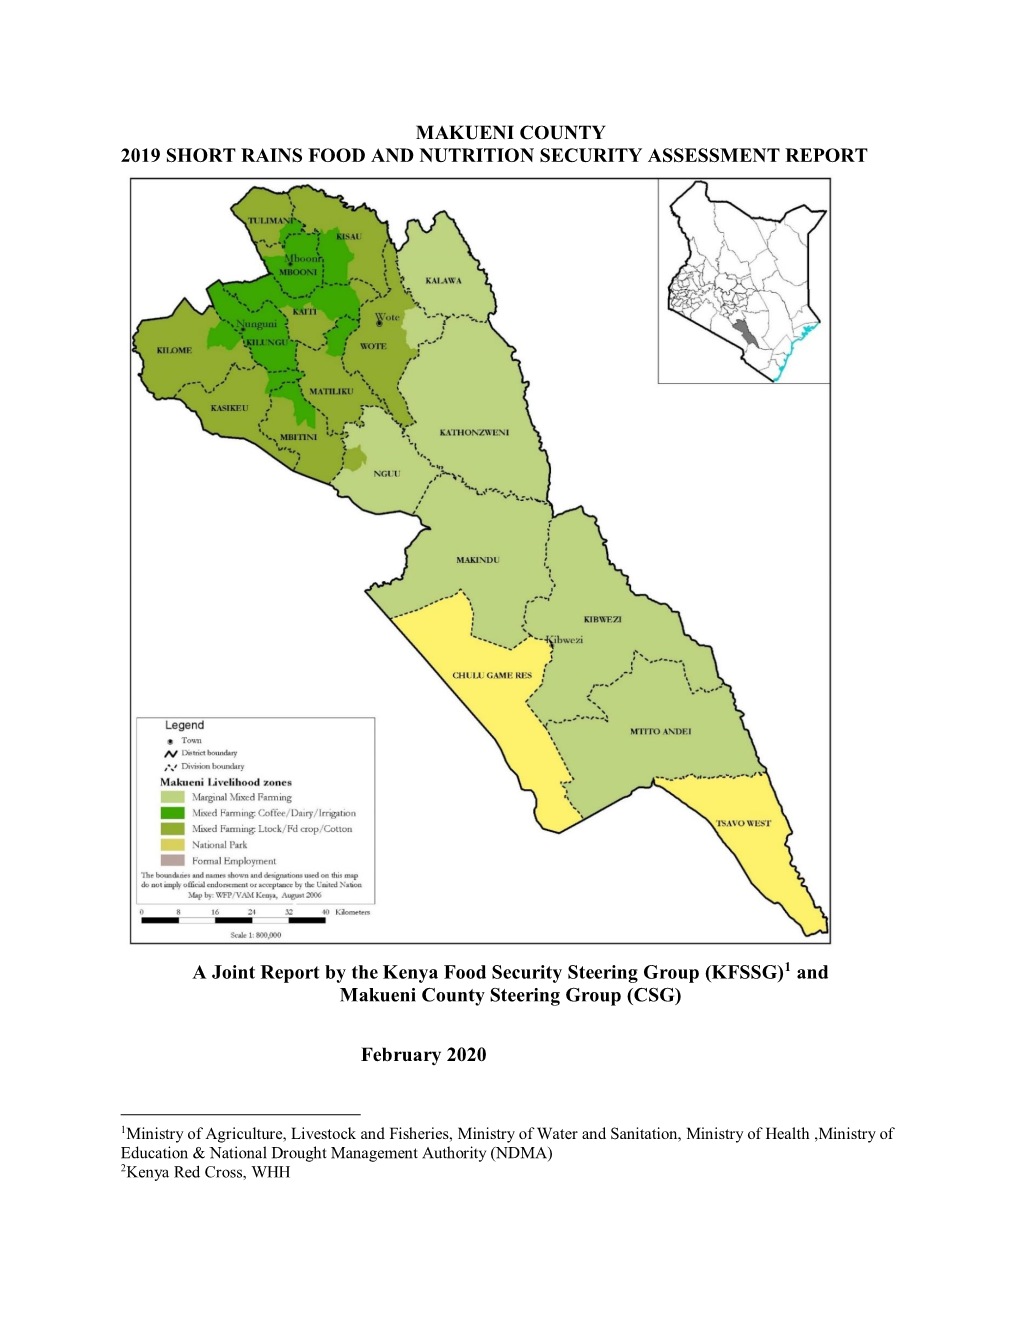 MAKUENI COUNTY 2019 SHORT RAINS FOOD and NUTRITION SECURITY ASSESSMENT REPORT a Joint Report by the Kenya Food Security Steering